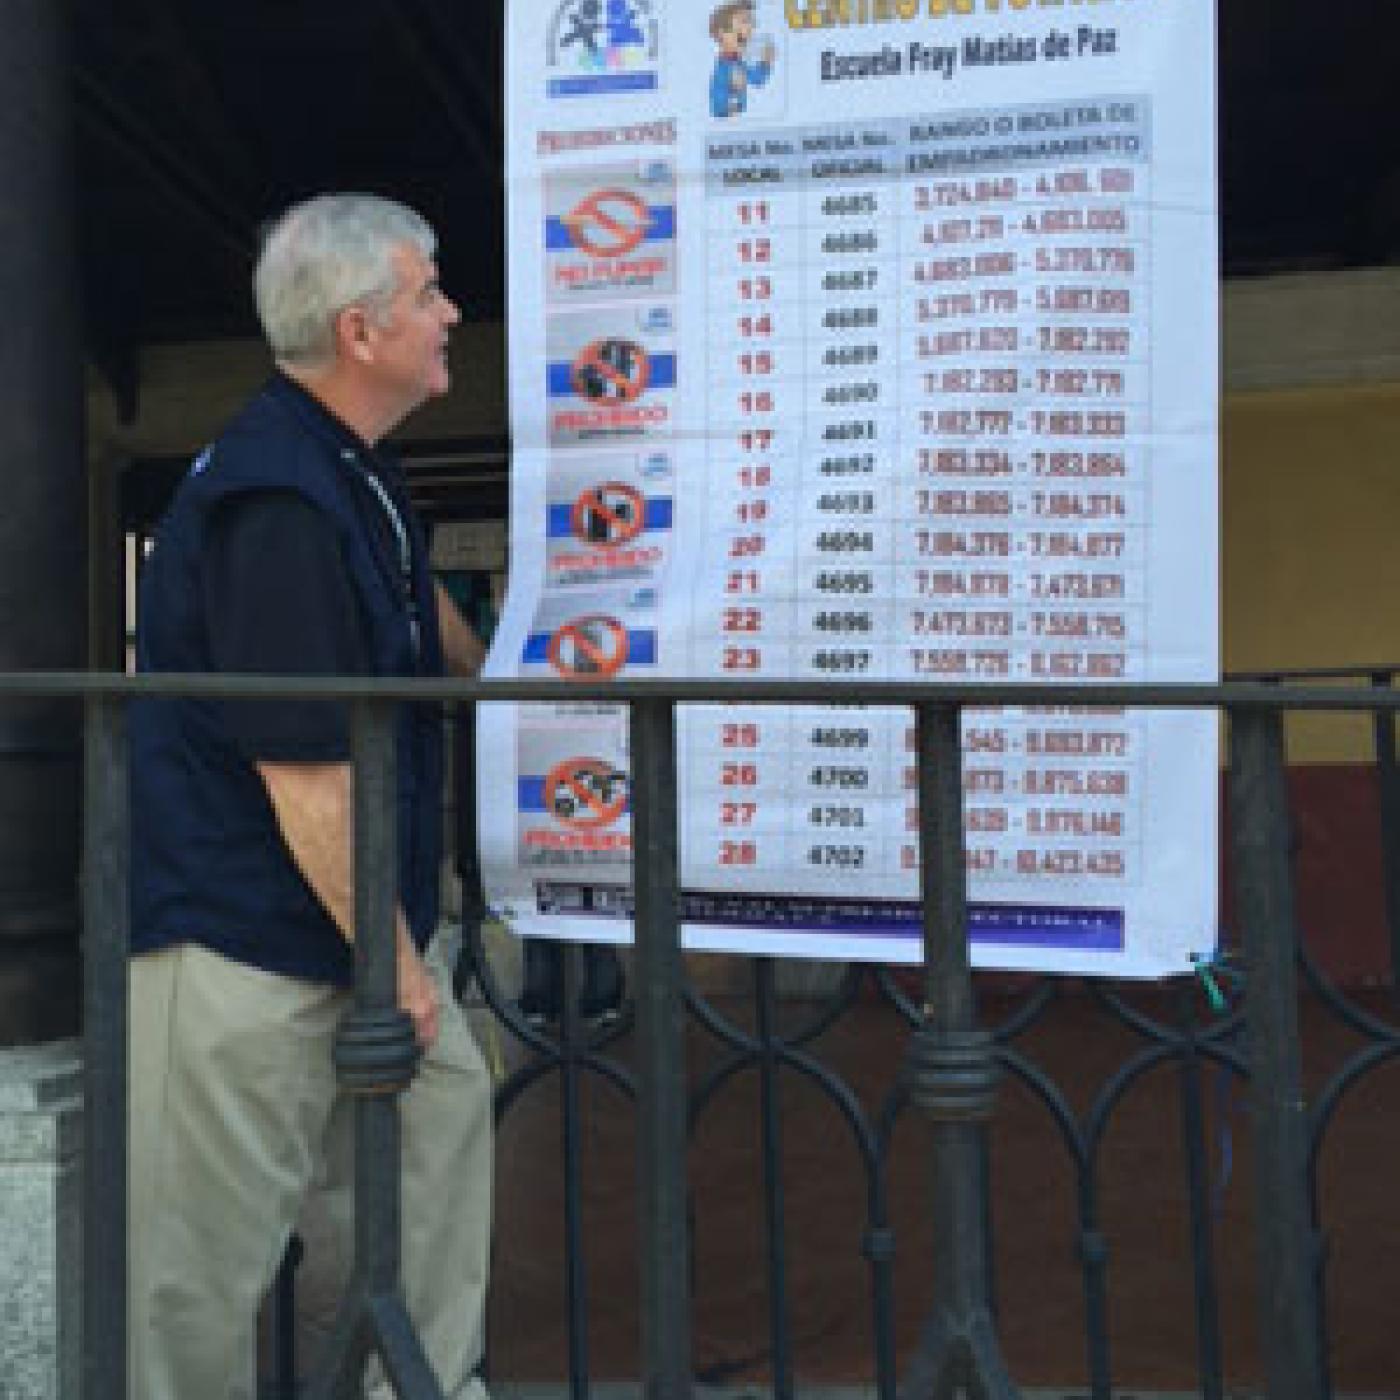 President Sweeney examines a voter education poster detailing how voters' can find their polling location in Ciudad Vieja.